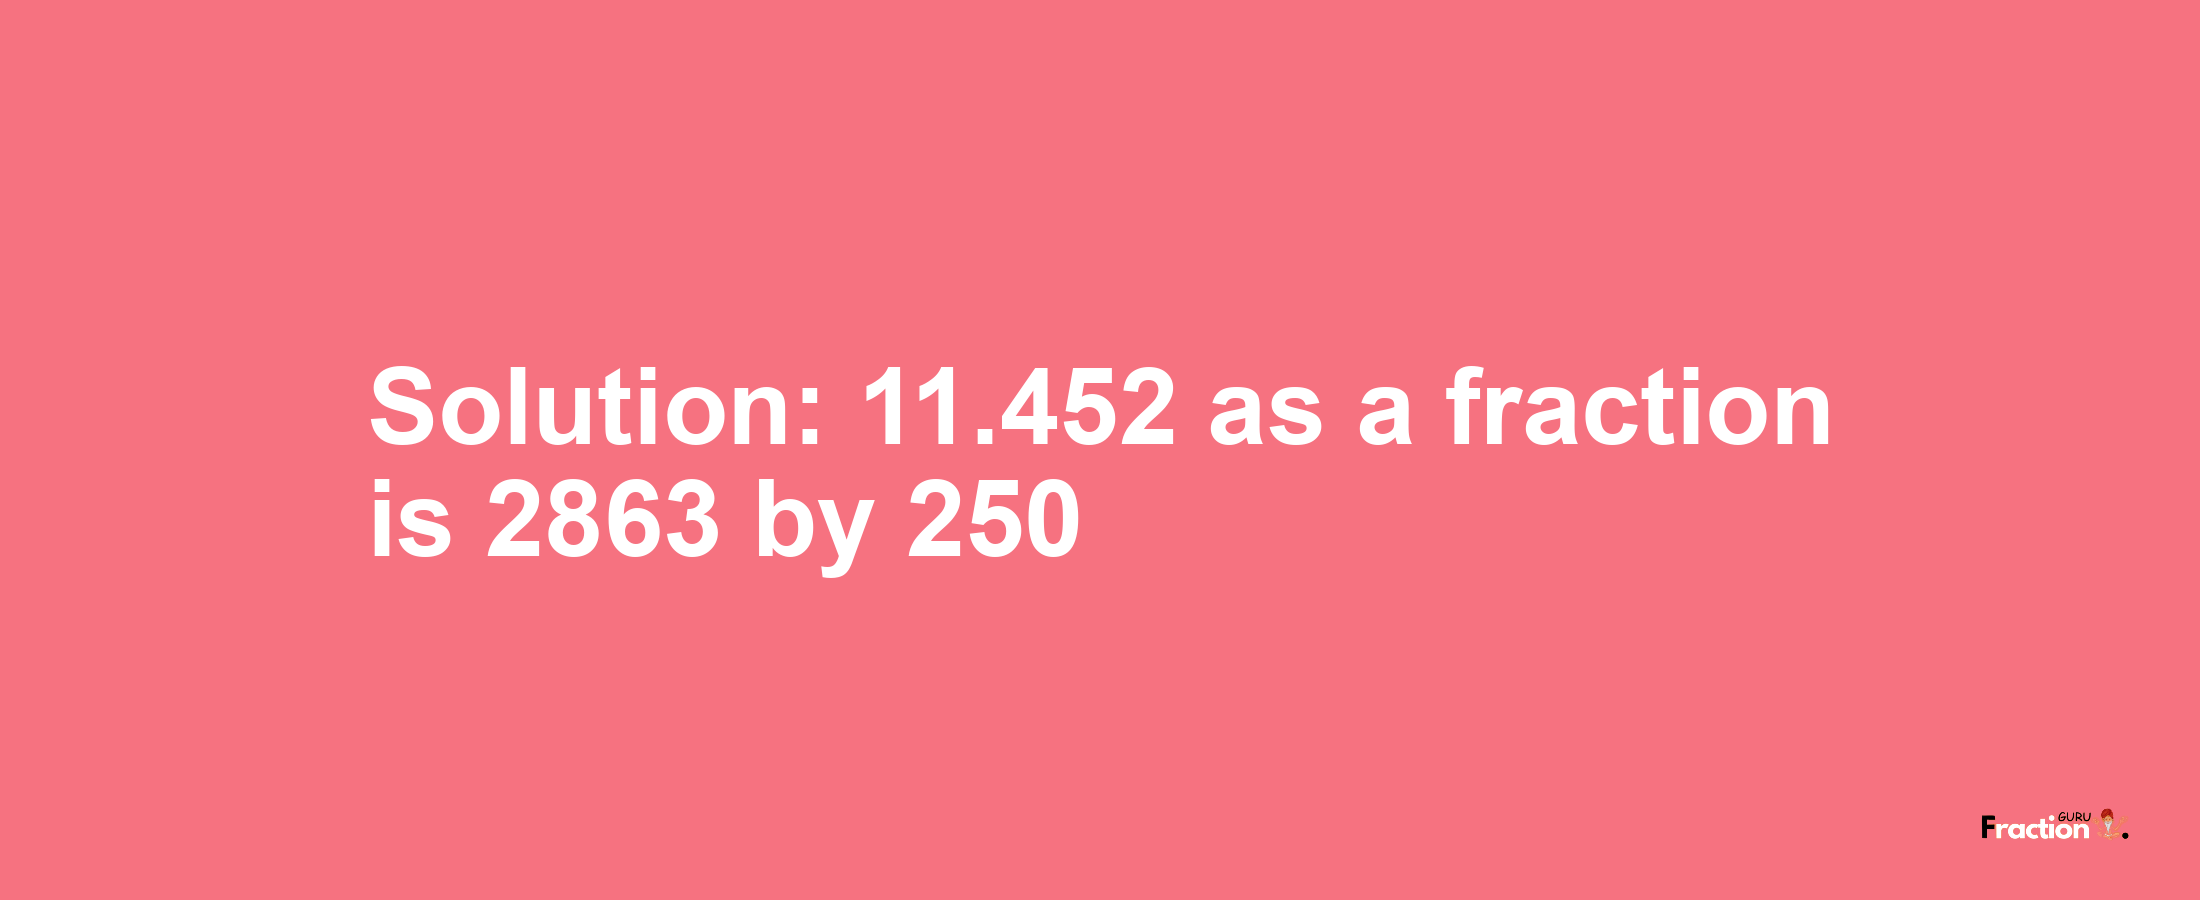 Solution:11.452 as a fraction is 2863/250